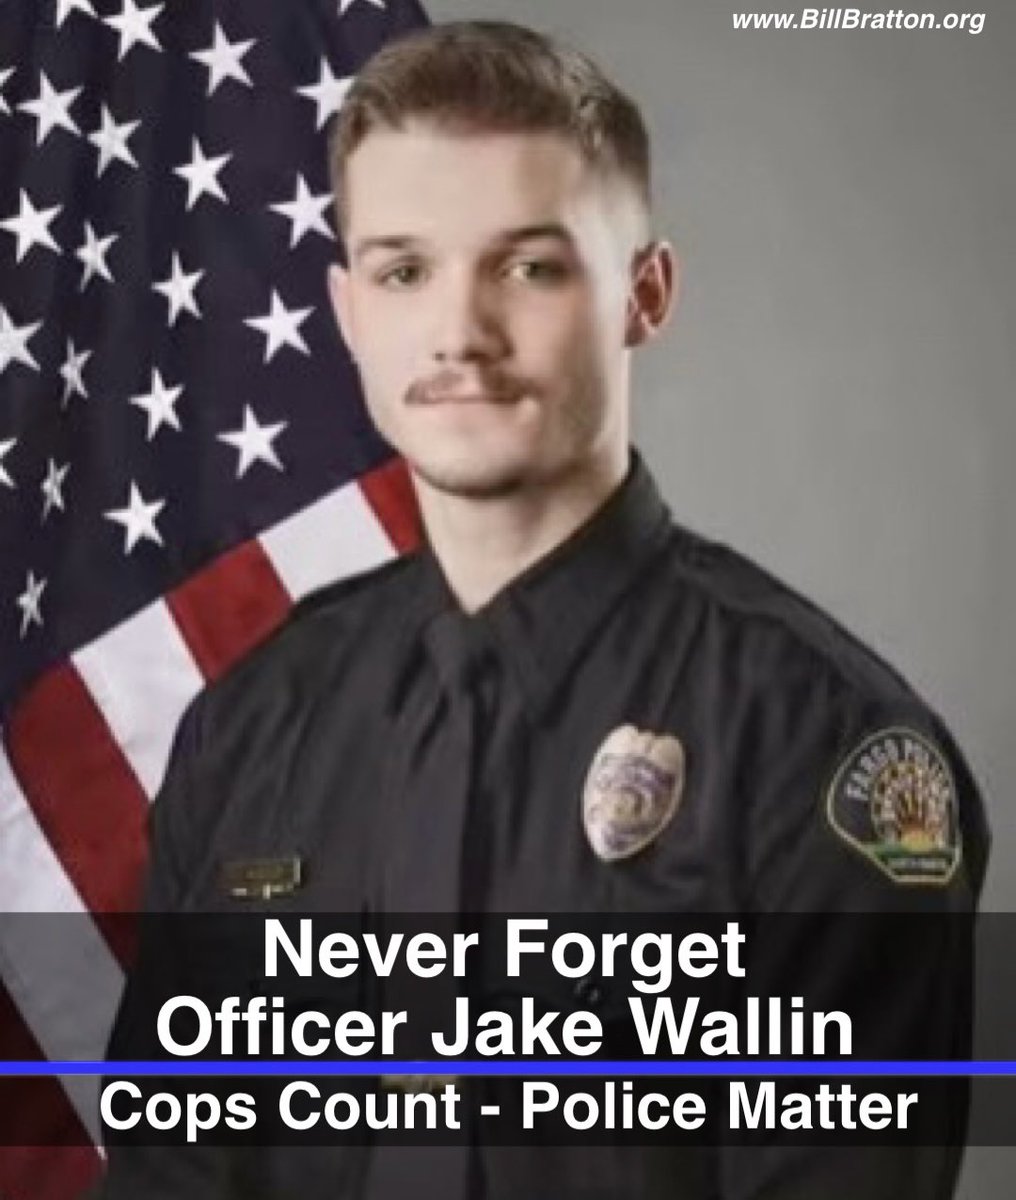 .@FargoPolice Officer Jake Wallin was just 23 years old with 3 months on the Job. Today, he was shot and killed in the line of duty — ambushed alongside his fellow cops who were injured as they investigated a car crash. This tragic incident is yet another stark reminder of the…